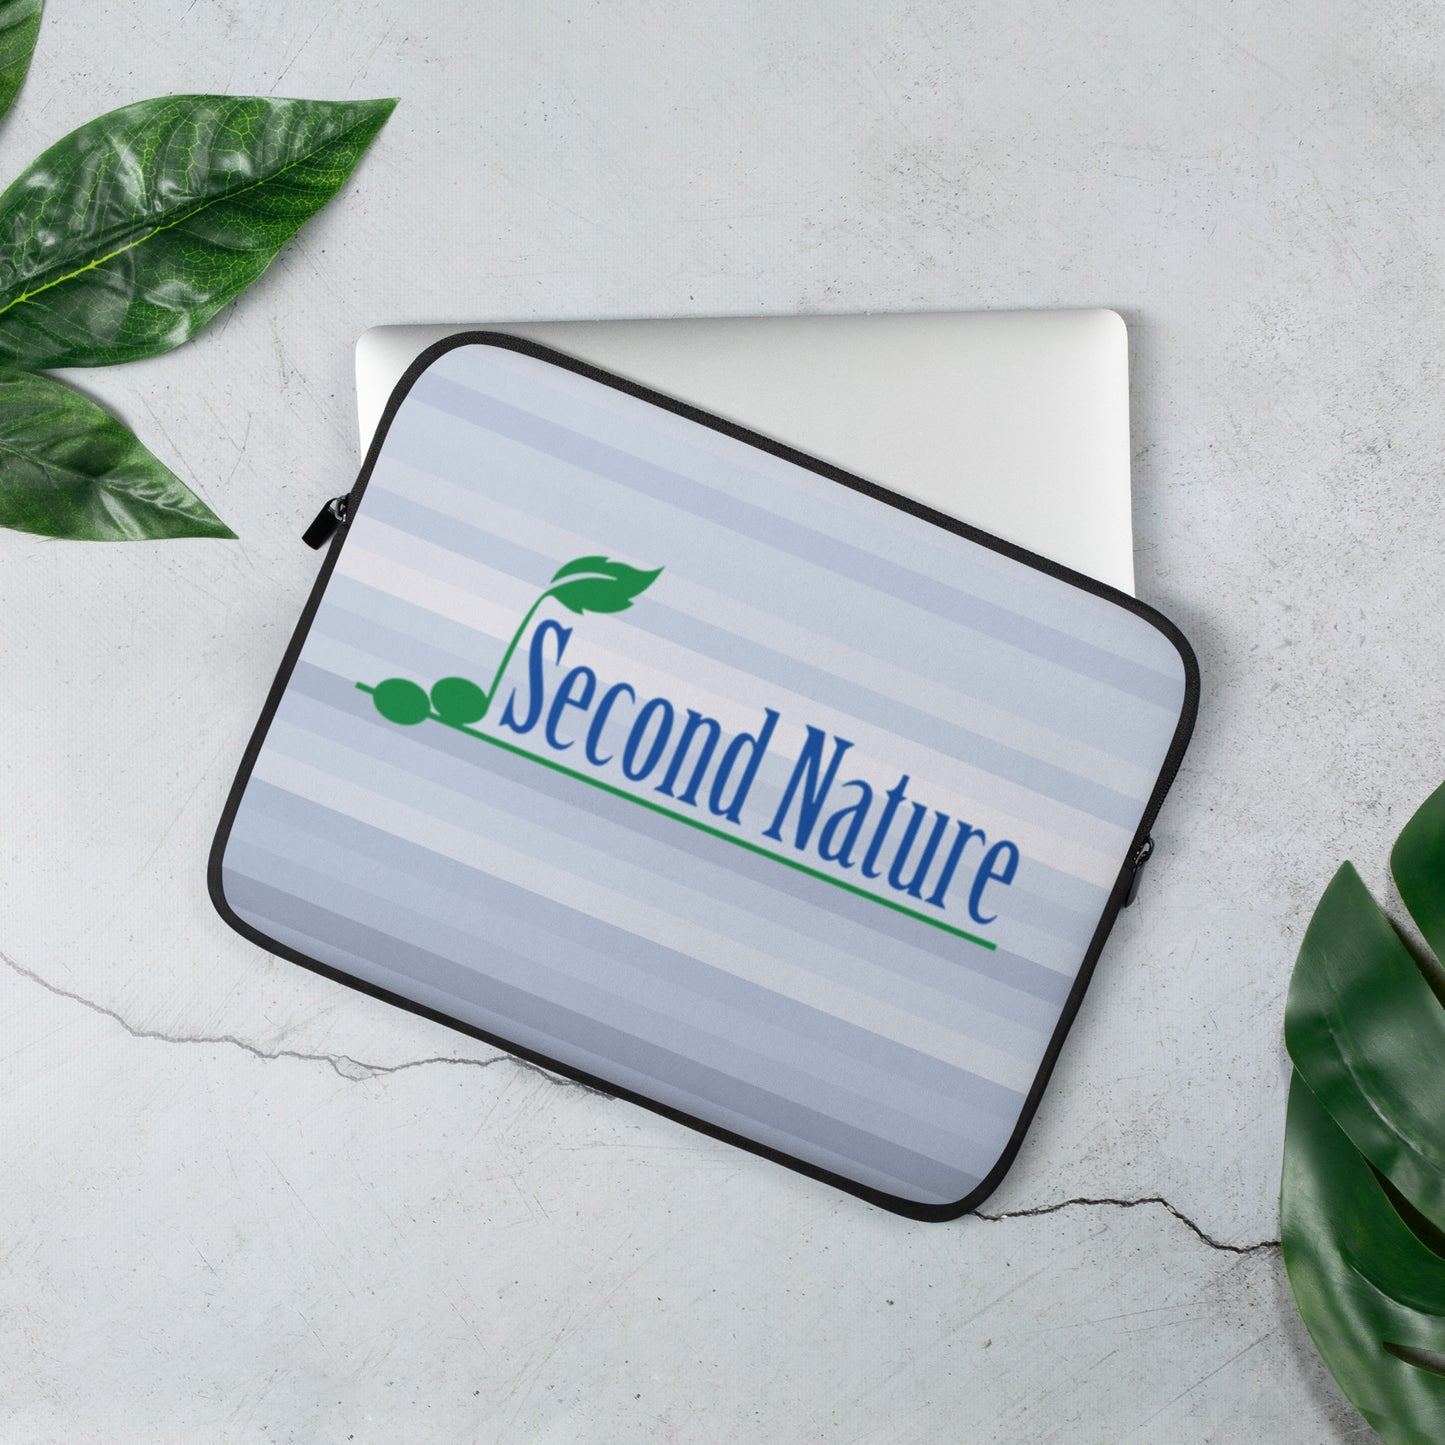 Second Nature - Printed Laptop Sleeve